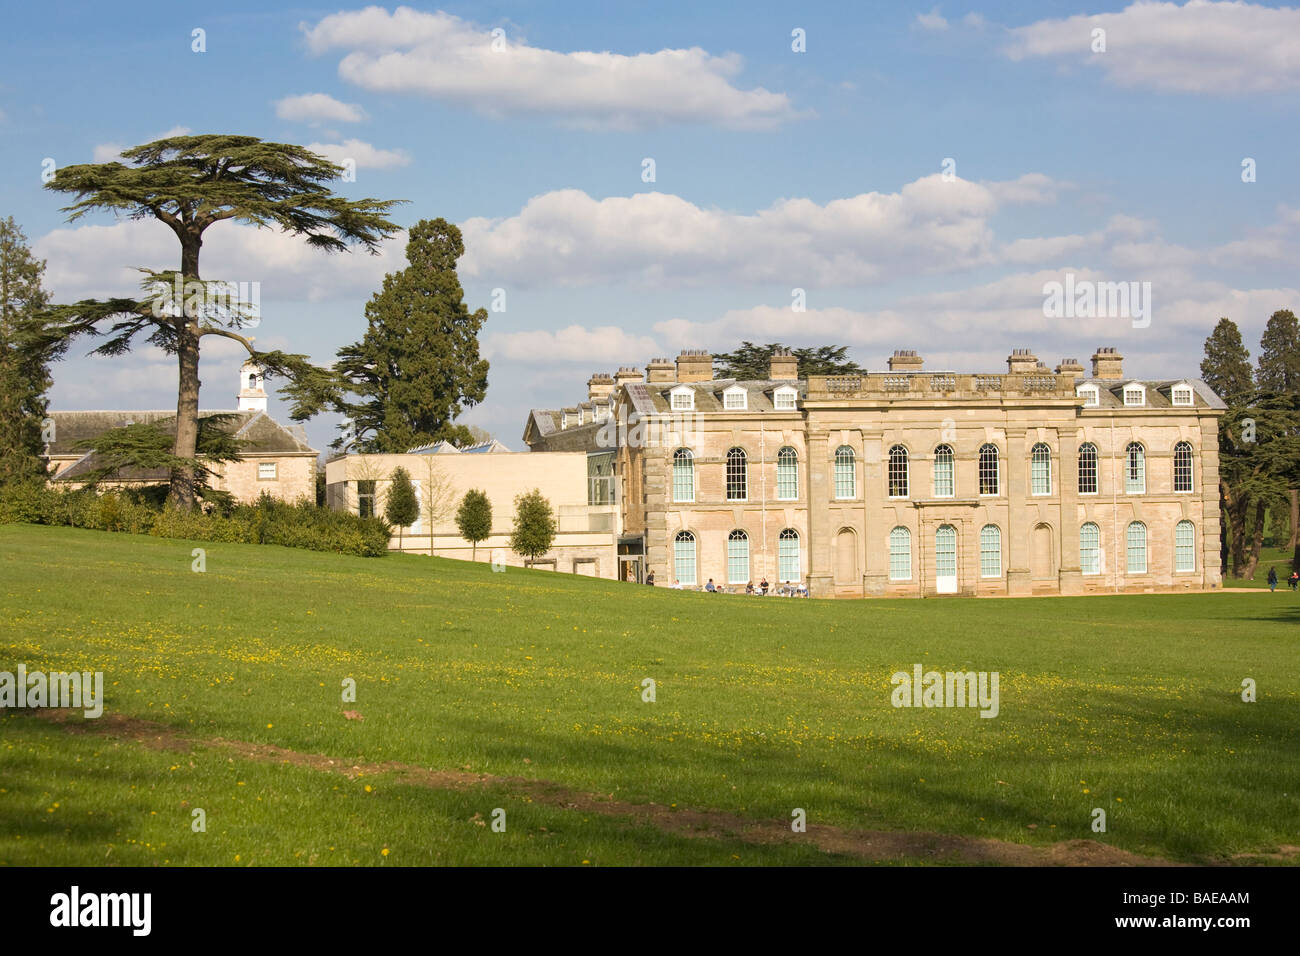 Compton Verney art gallery, Warwickshire. A Robert Adam designed grade 1 listed building set in 120 acres of parkland. Stock Photo